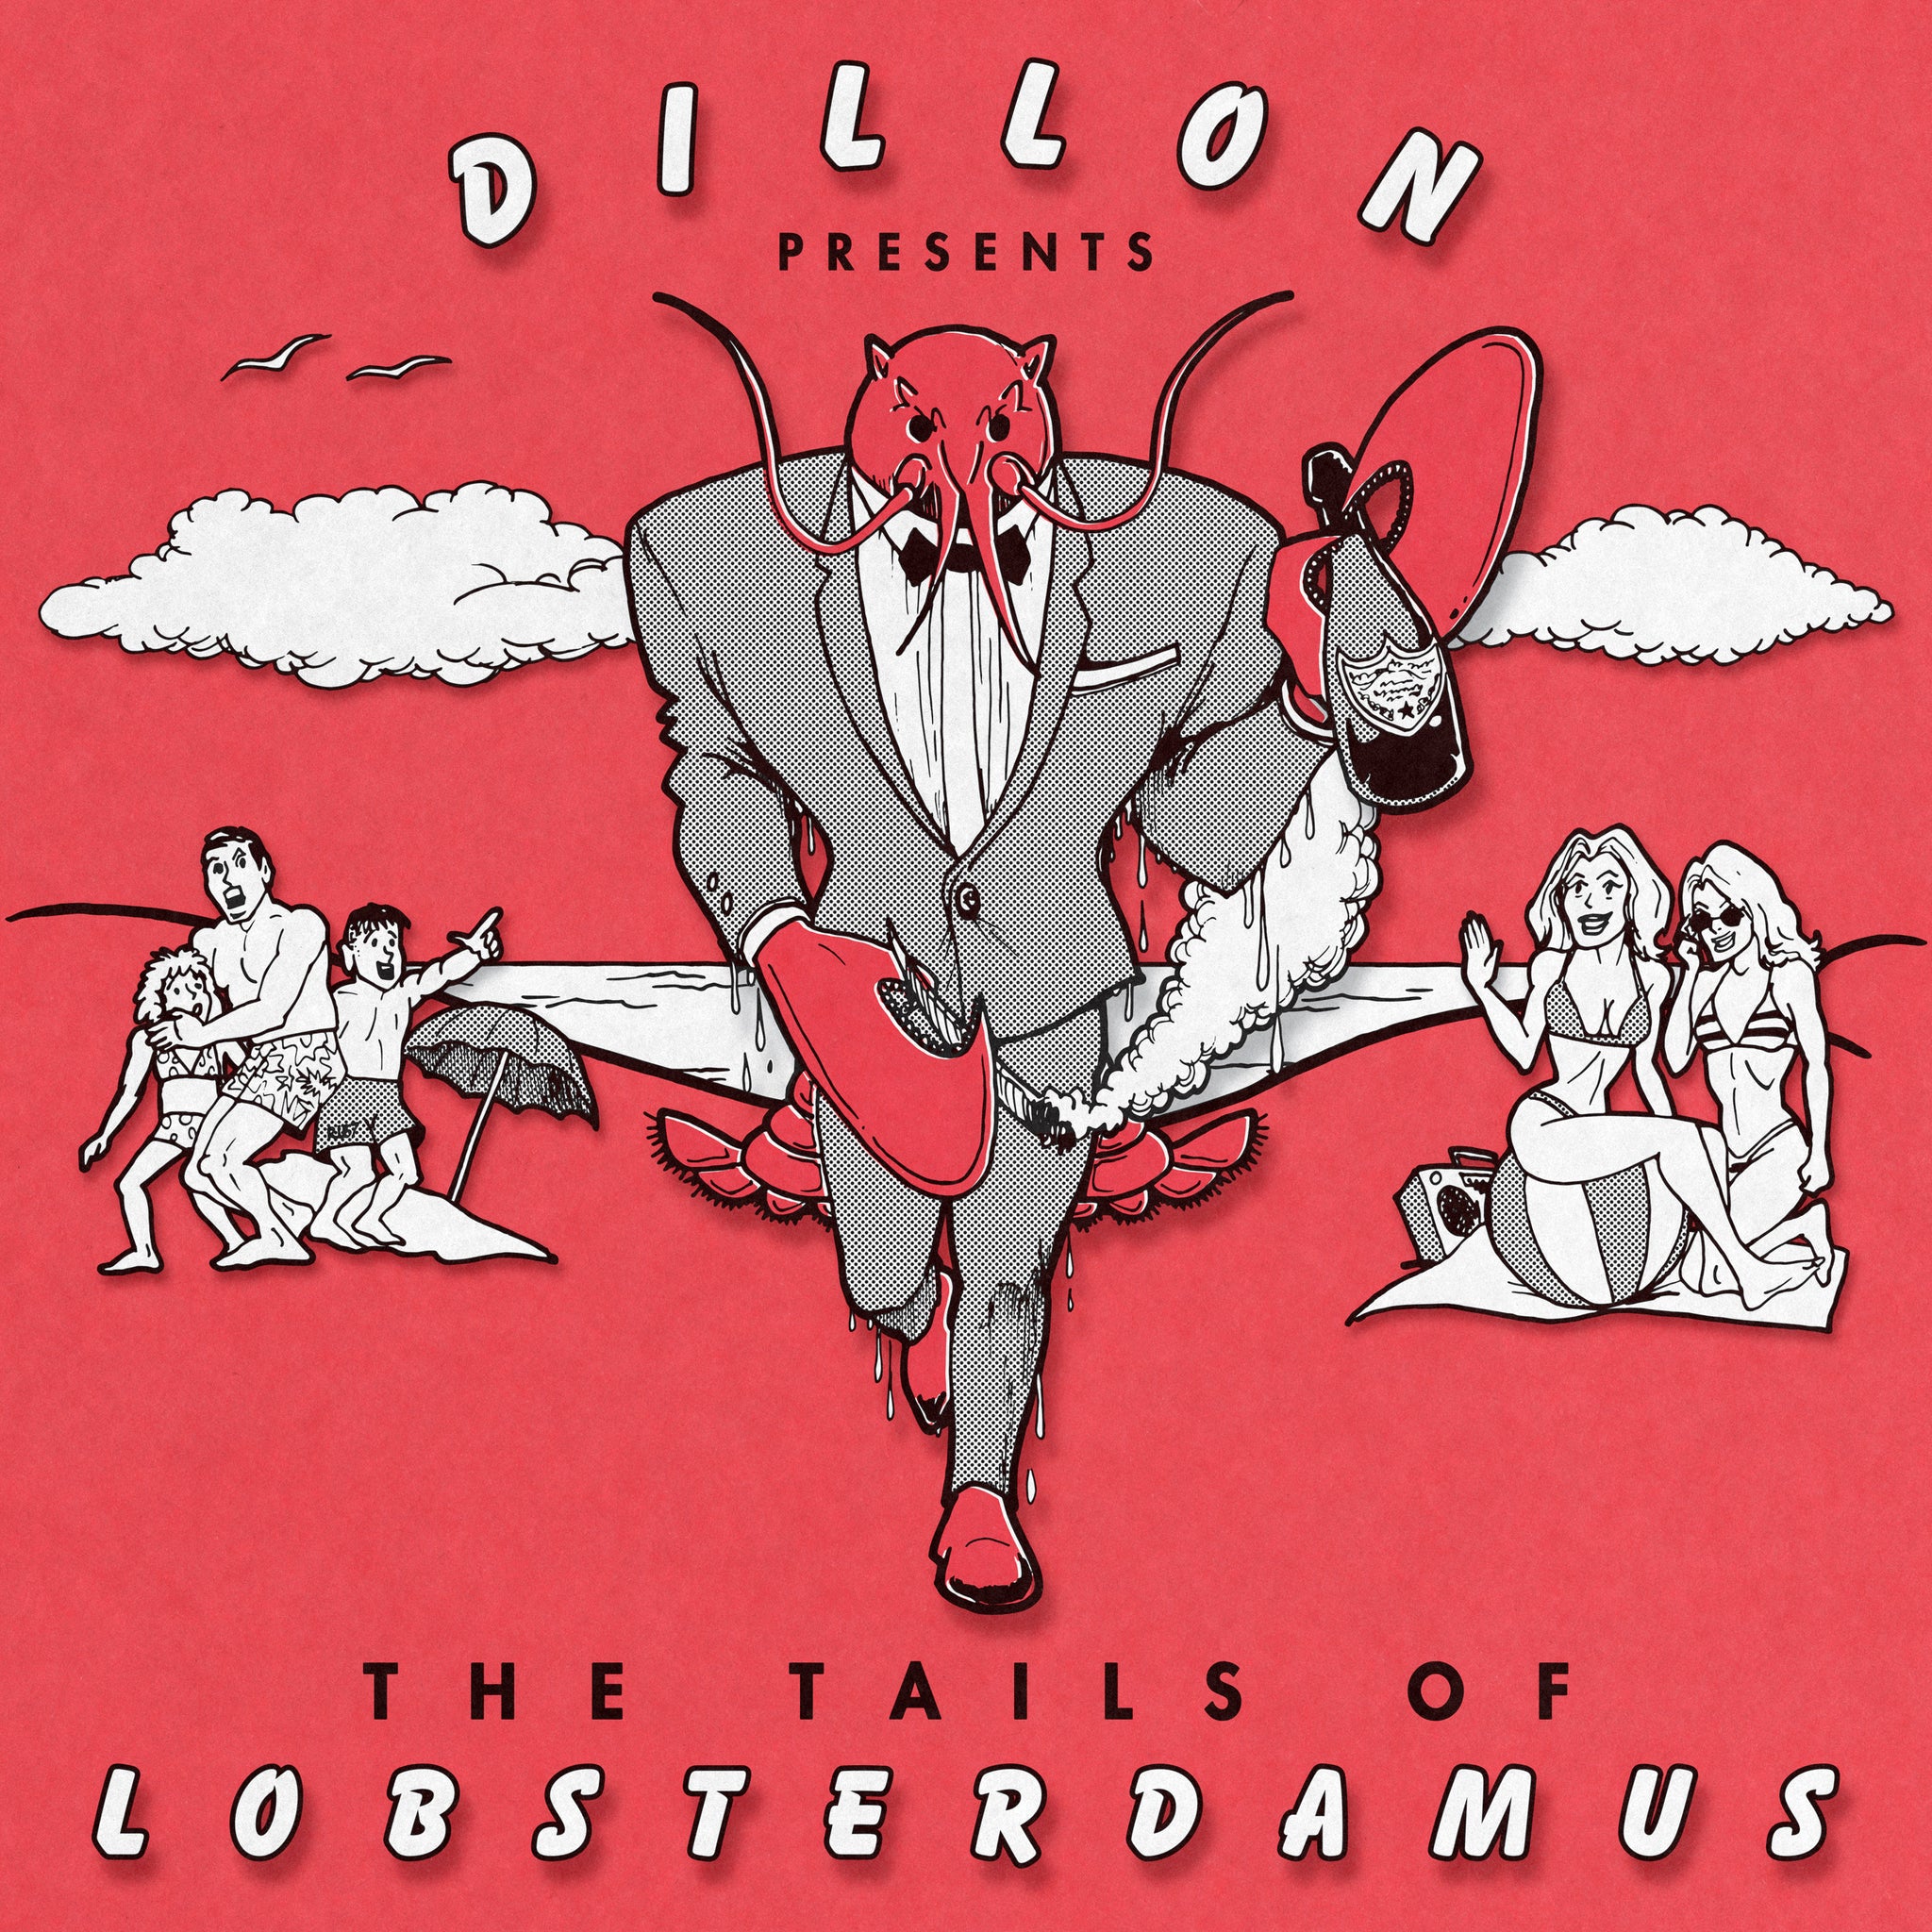 Dillon Presents: The Tails of Lobsterdamus (FP011)